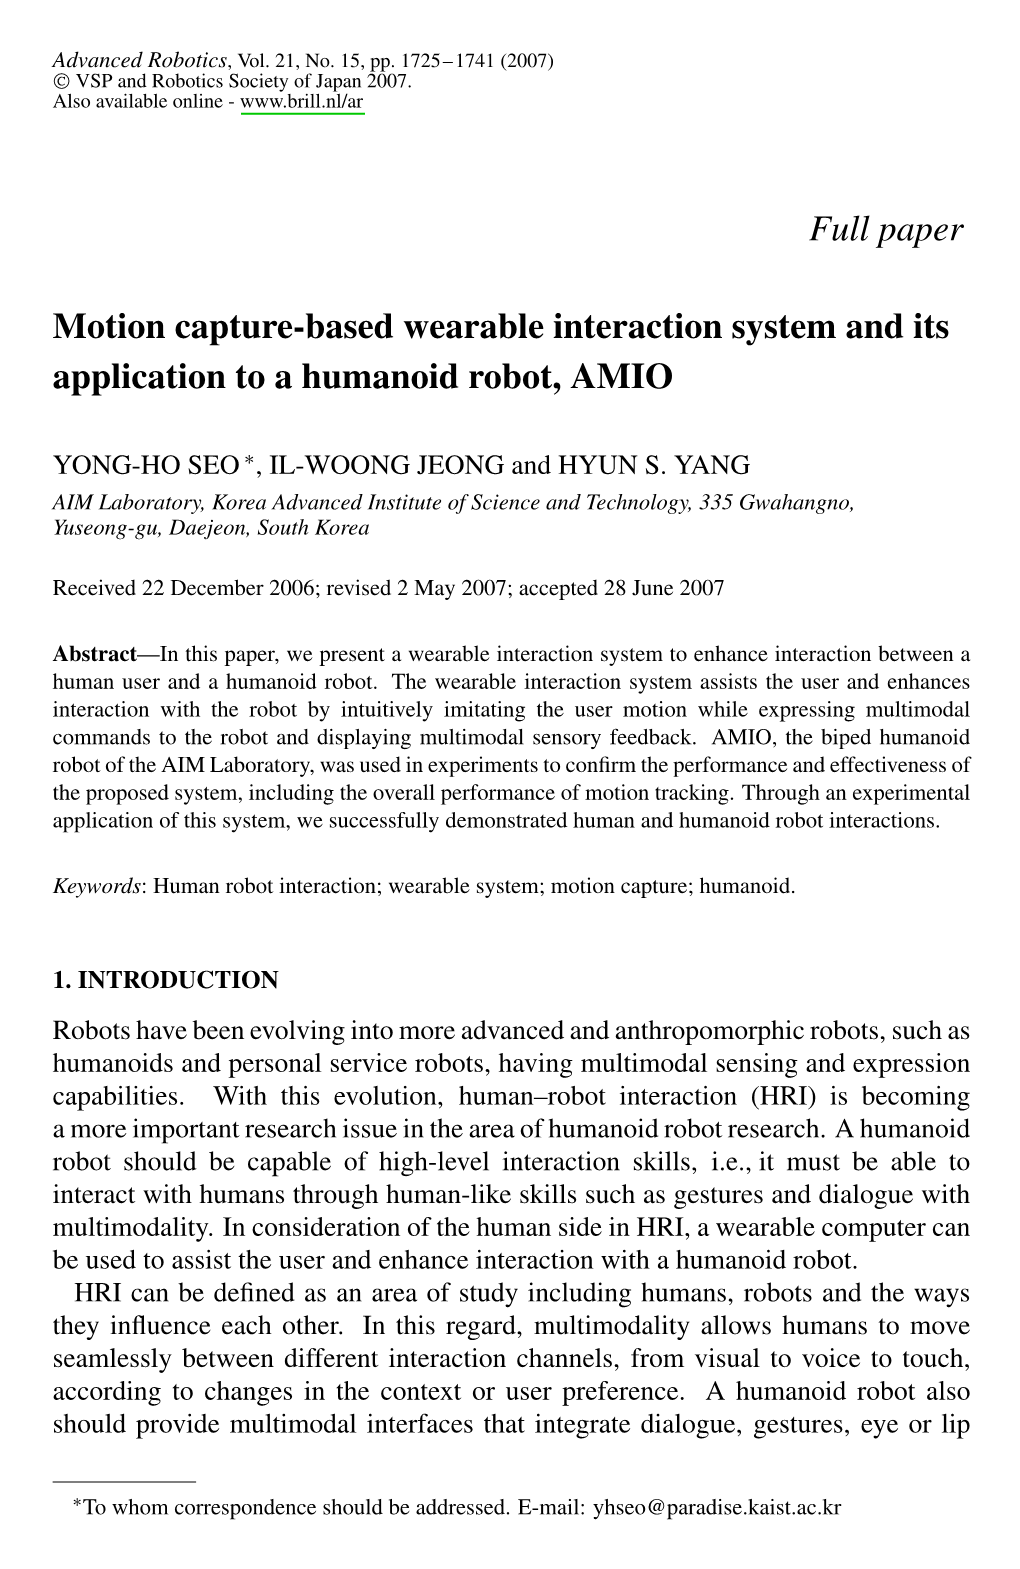 Full Paper Motion Capture-Based Wearable Interaction System and Its Application to a Humanoid Robot, AMIO